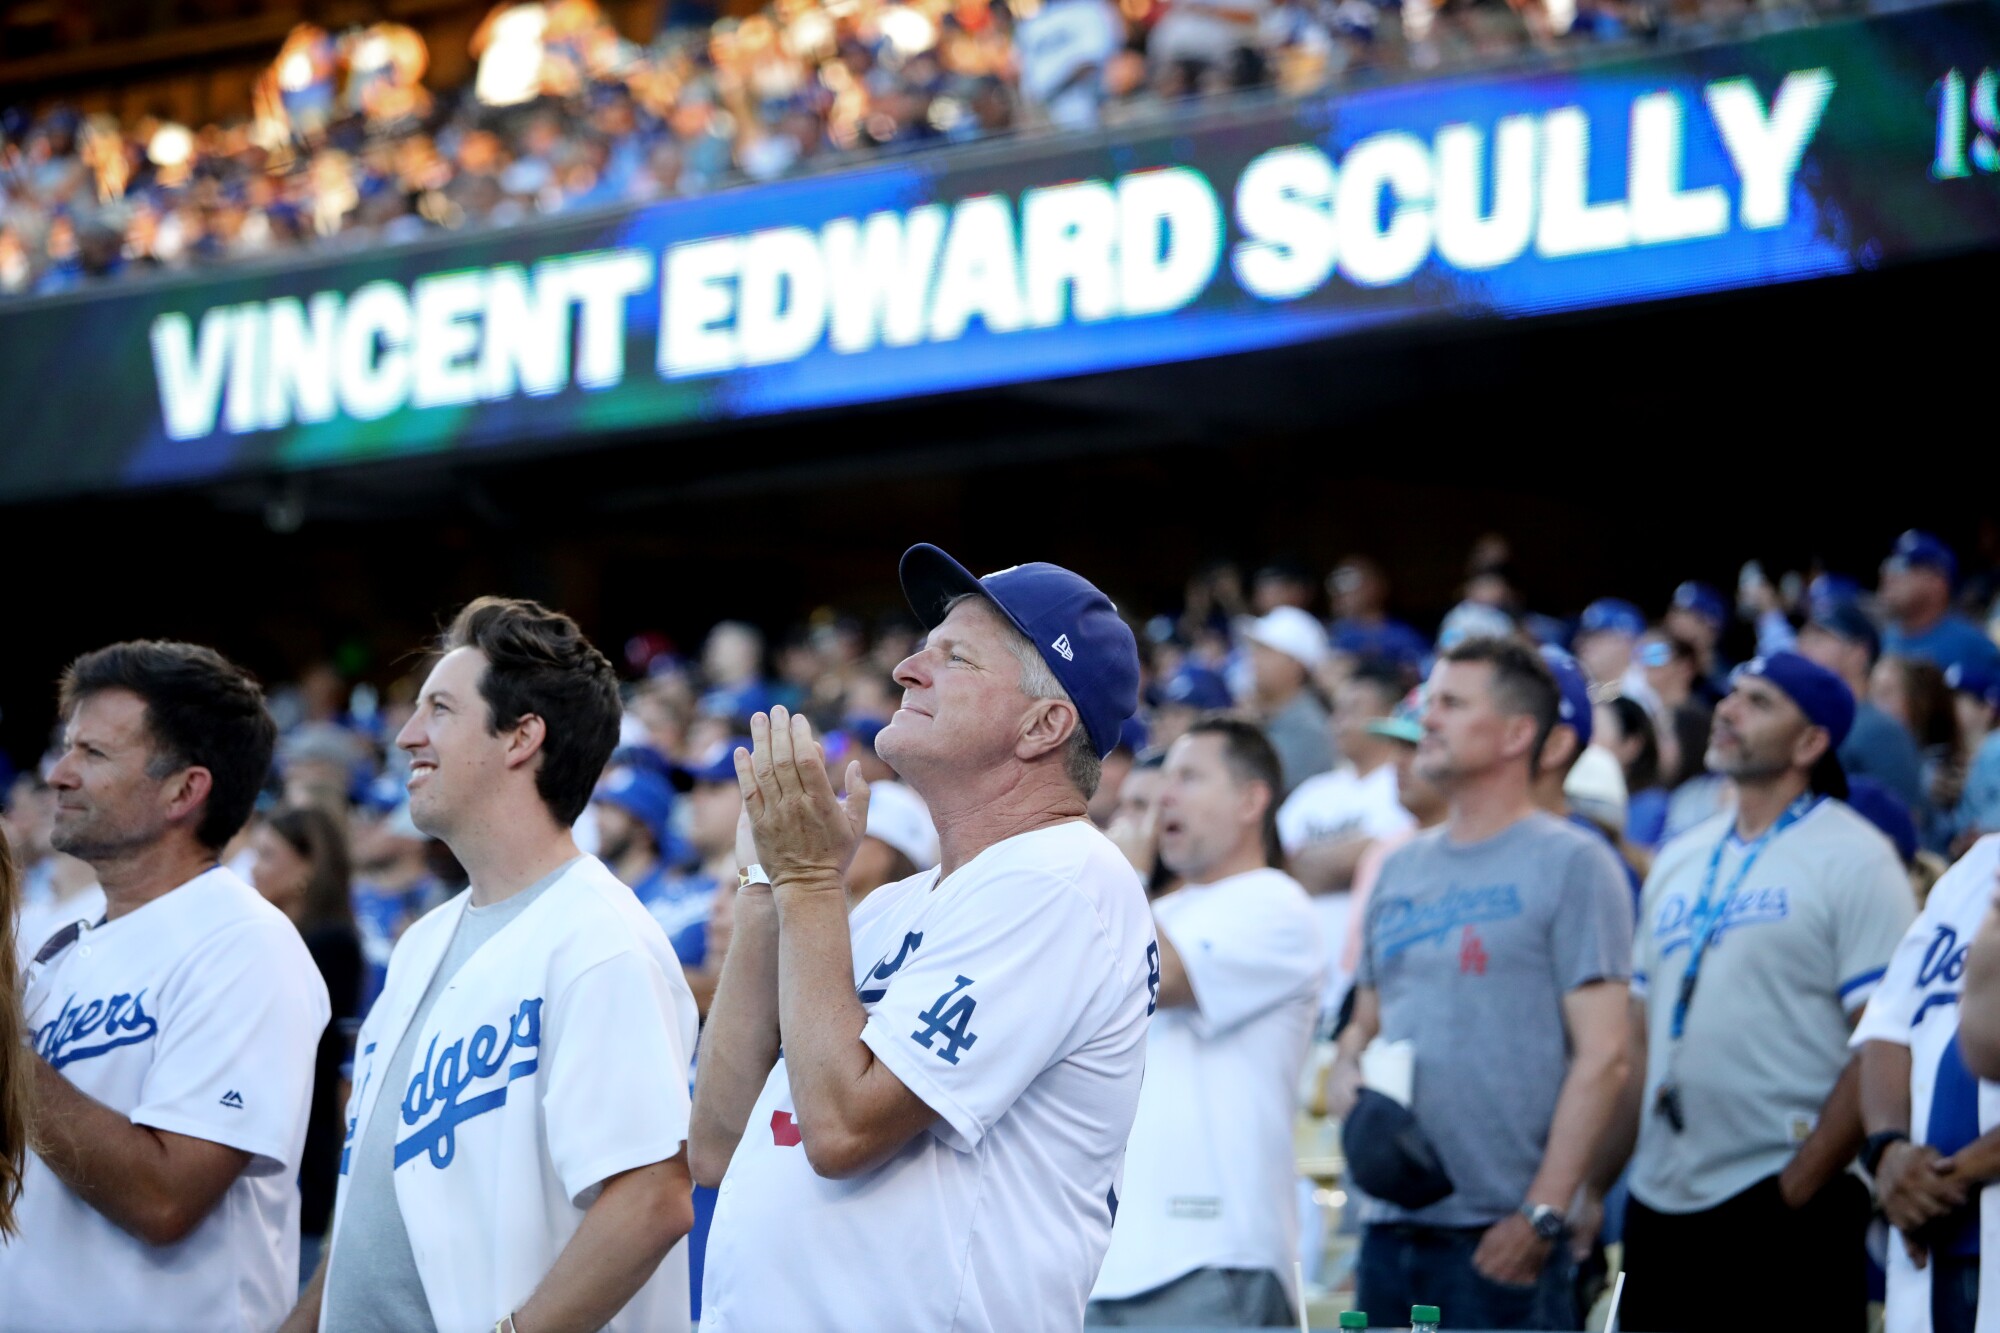 The Los Angeles Dodgers pay tribute to legendary broadcaster Vin Scully with a special pre-game ceremony